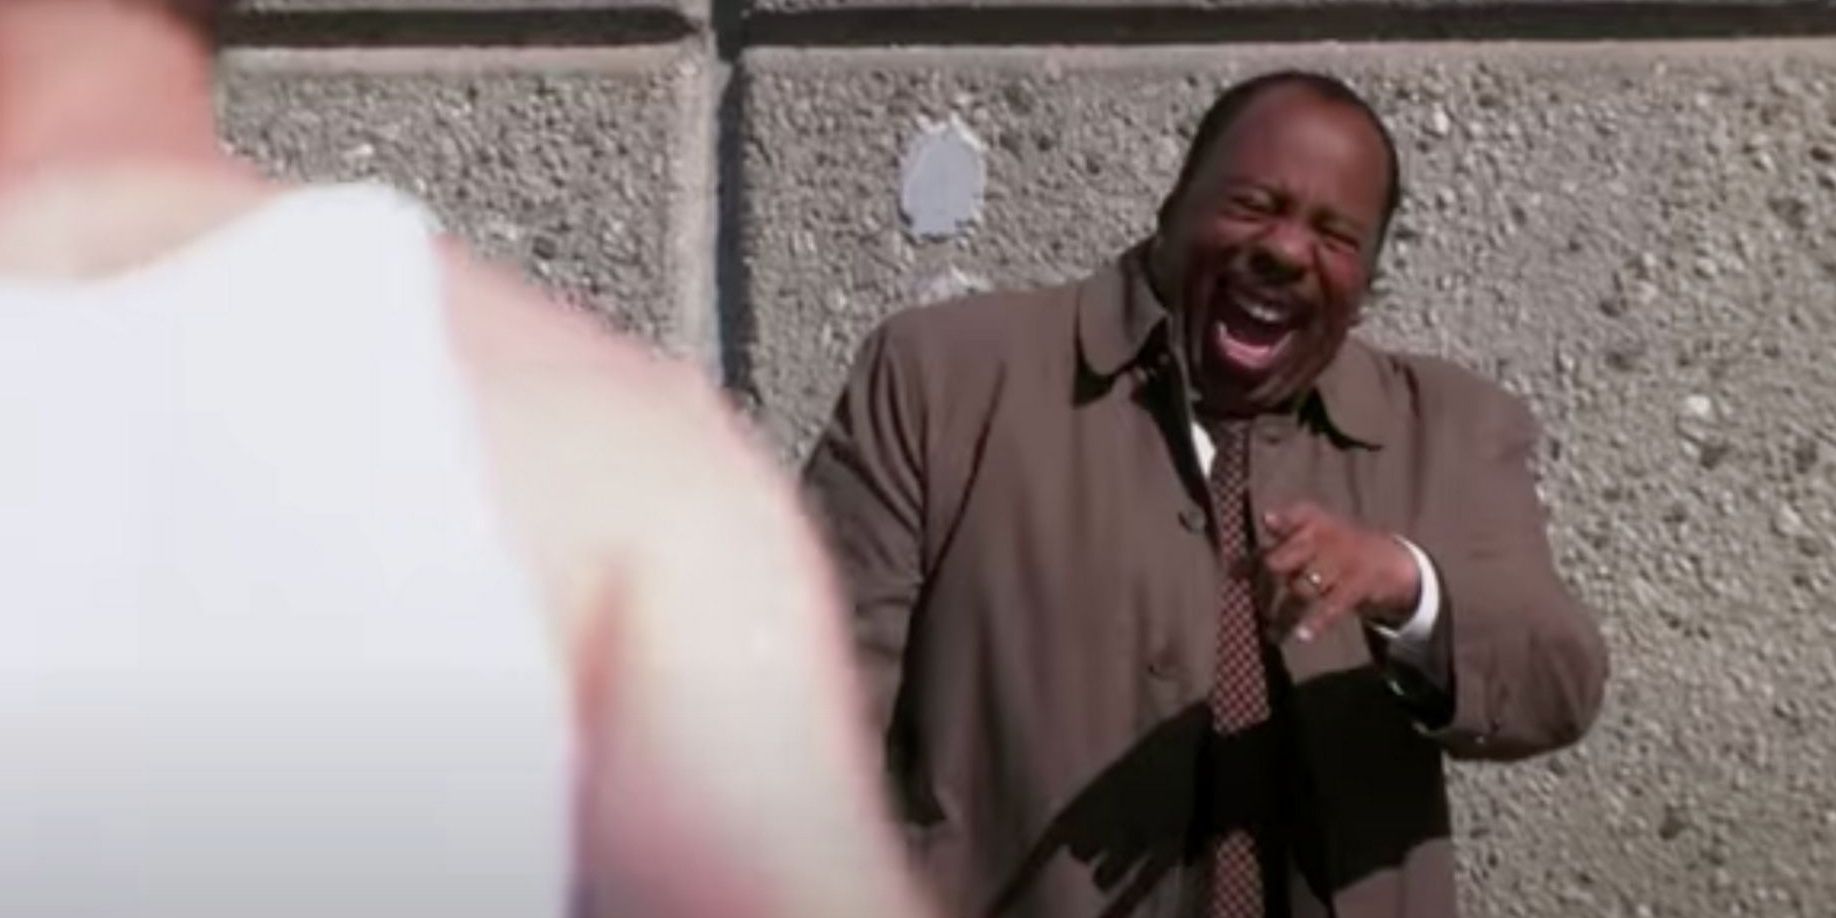 The Office: Stanley is pointing and laughing at Dwight Schrute who has had his velcro suit torn off.